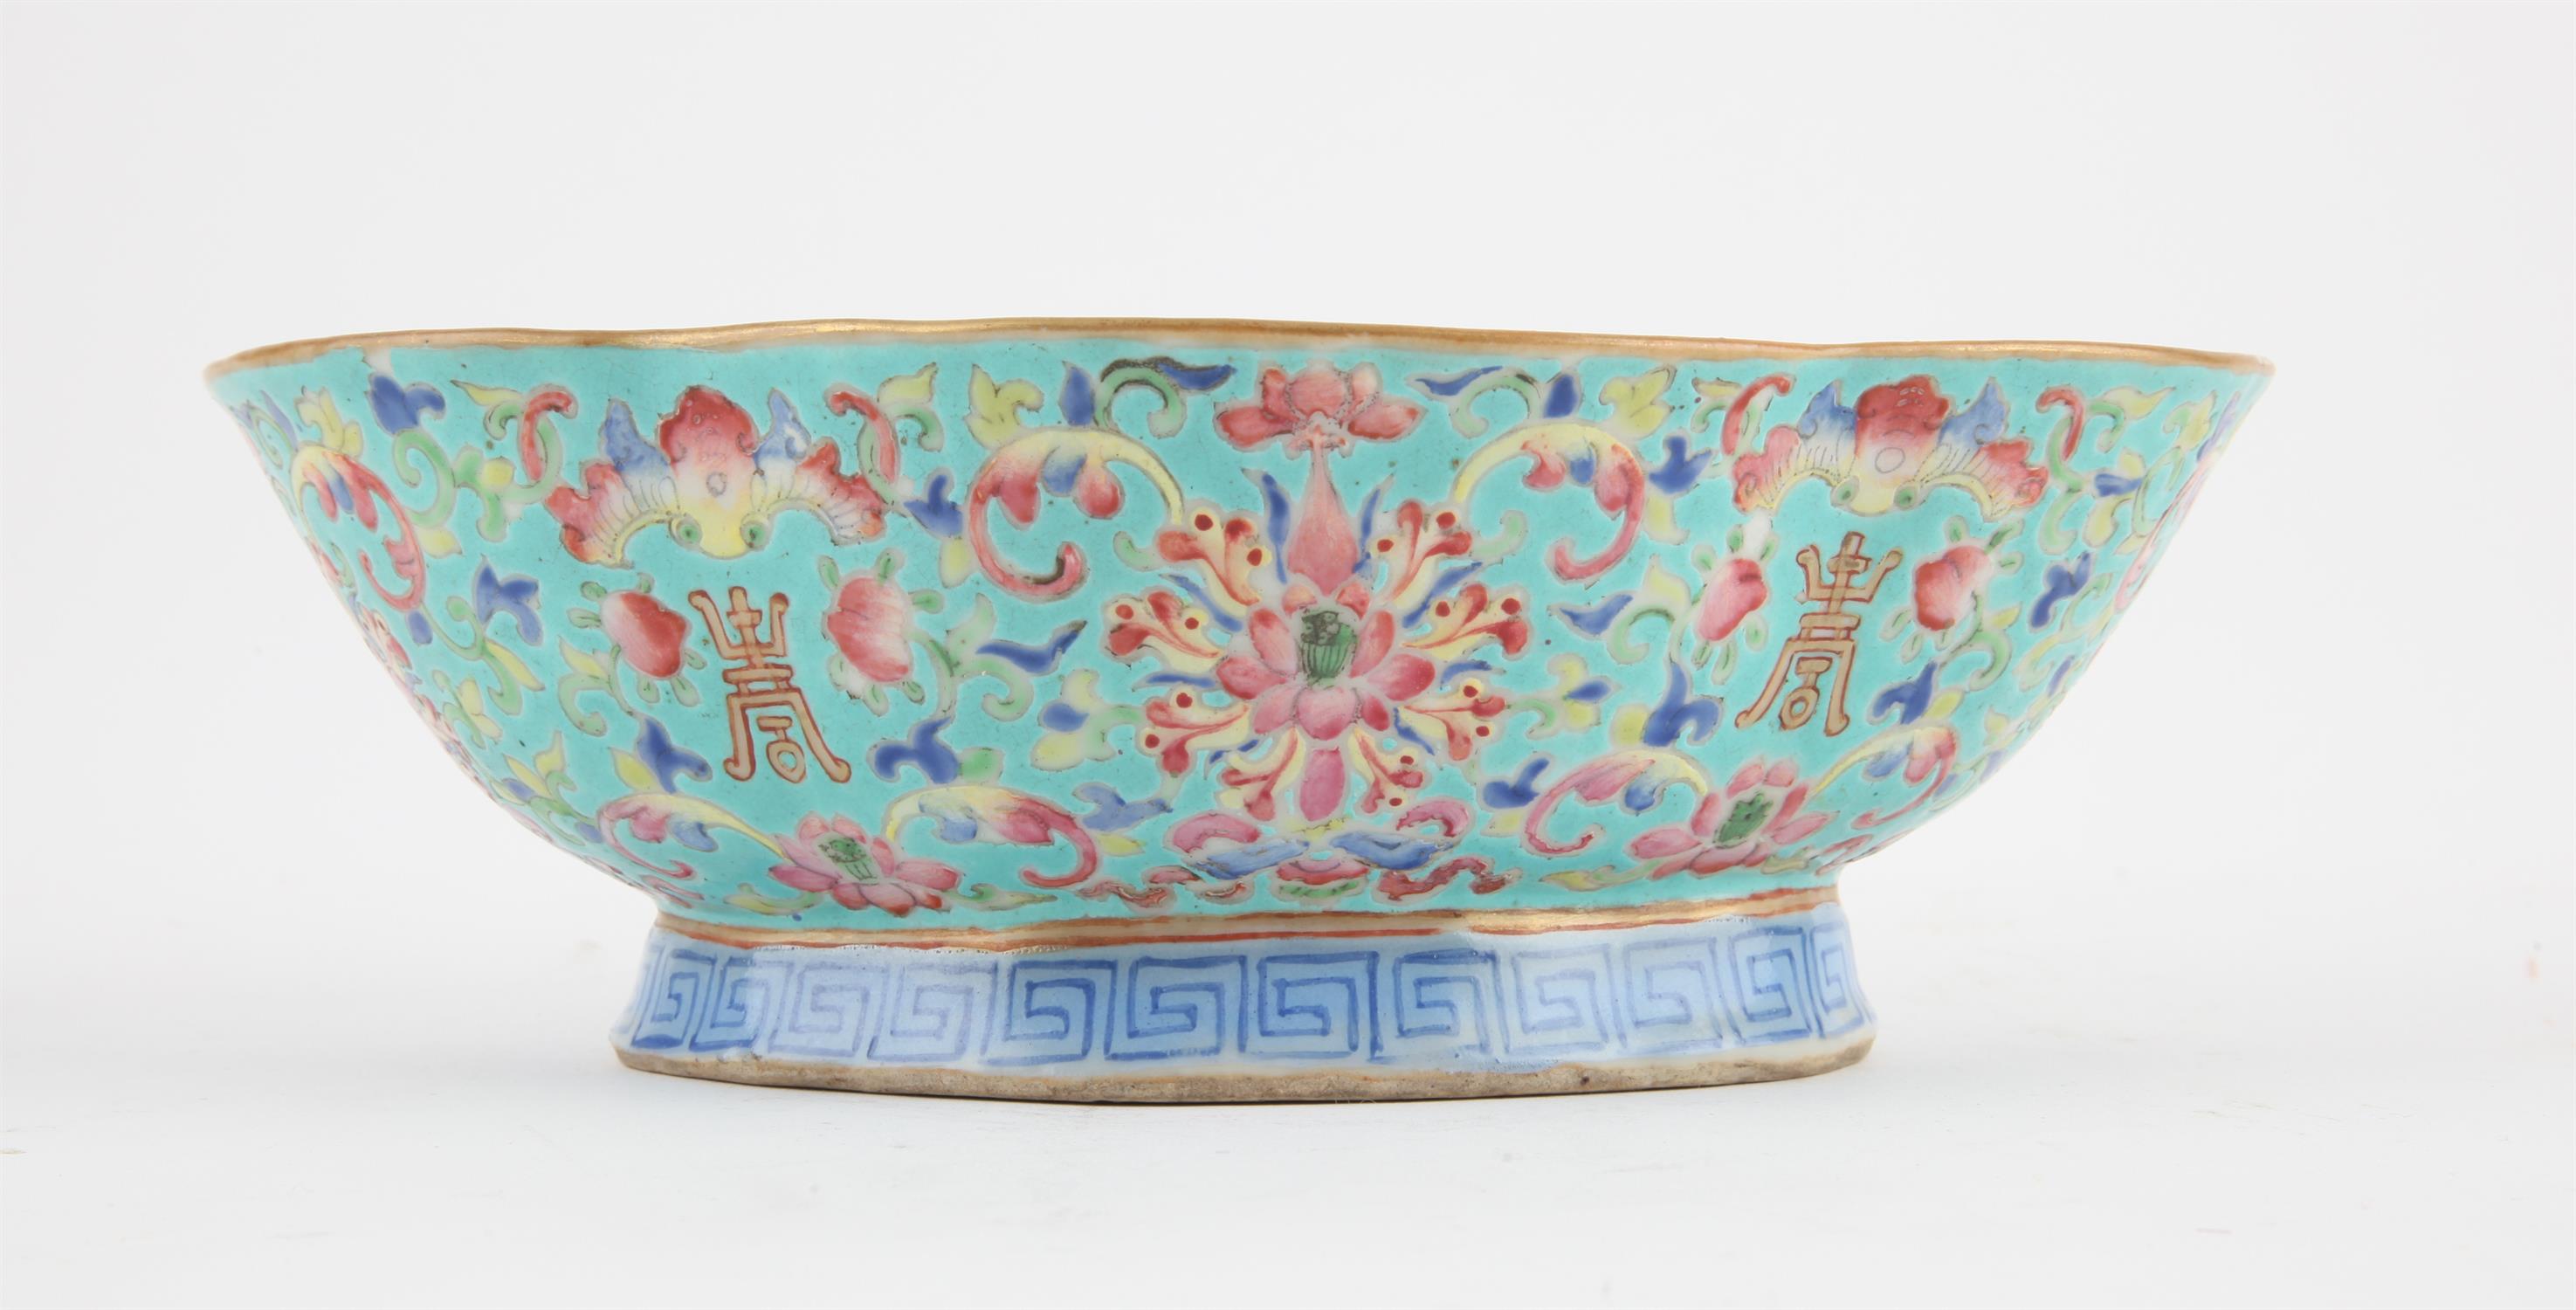 A Chinese Lobed Pedestal Bowl, Qing dynasty Painted with flowers , bats and the Shou longevity - Image 4 of 8